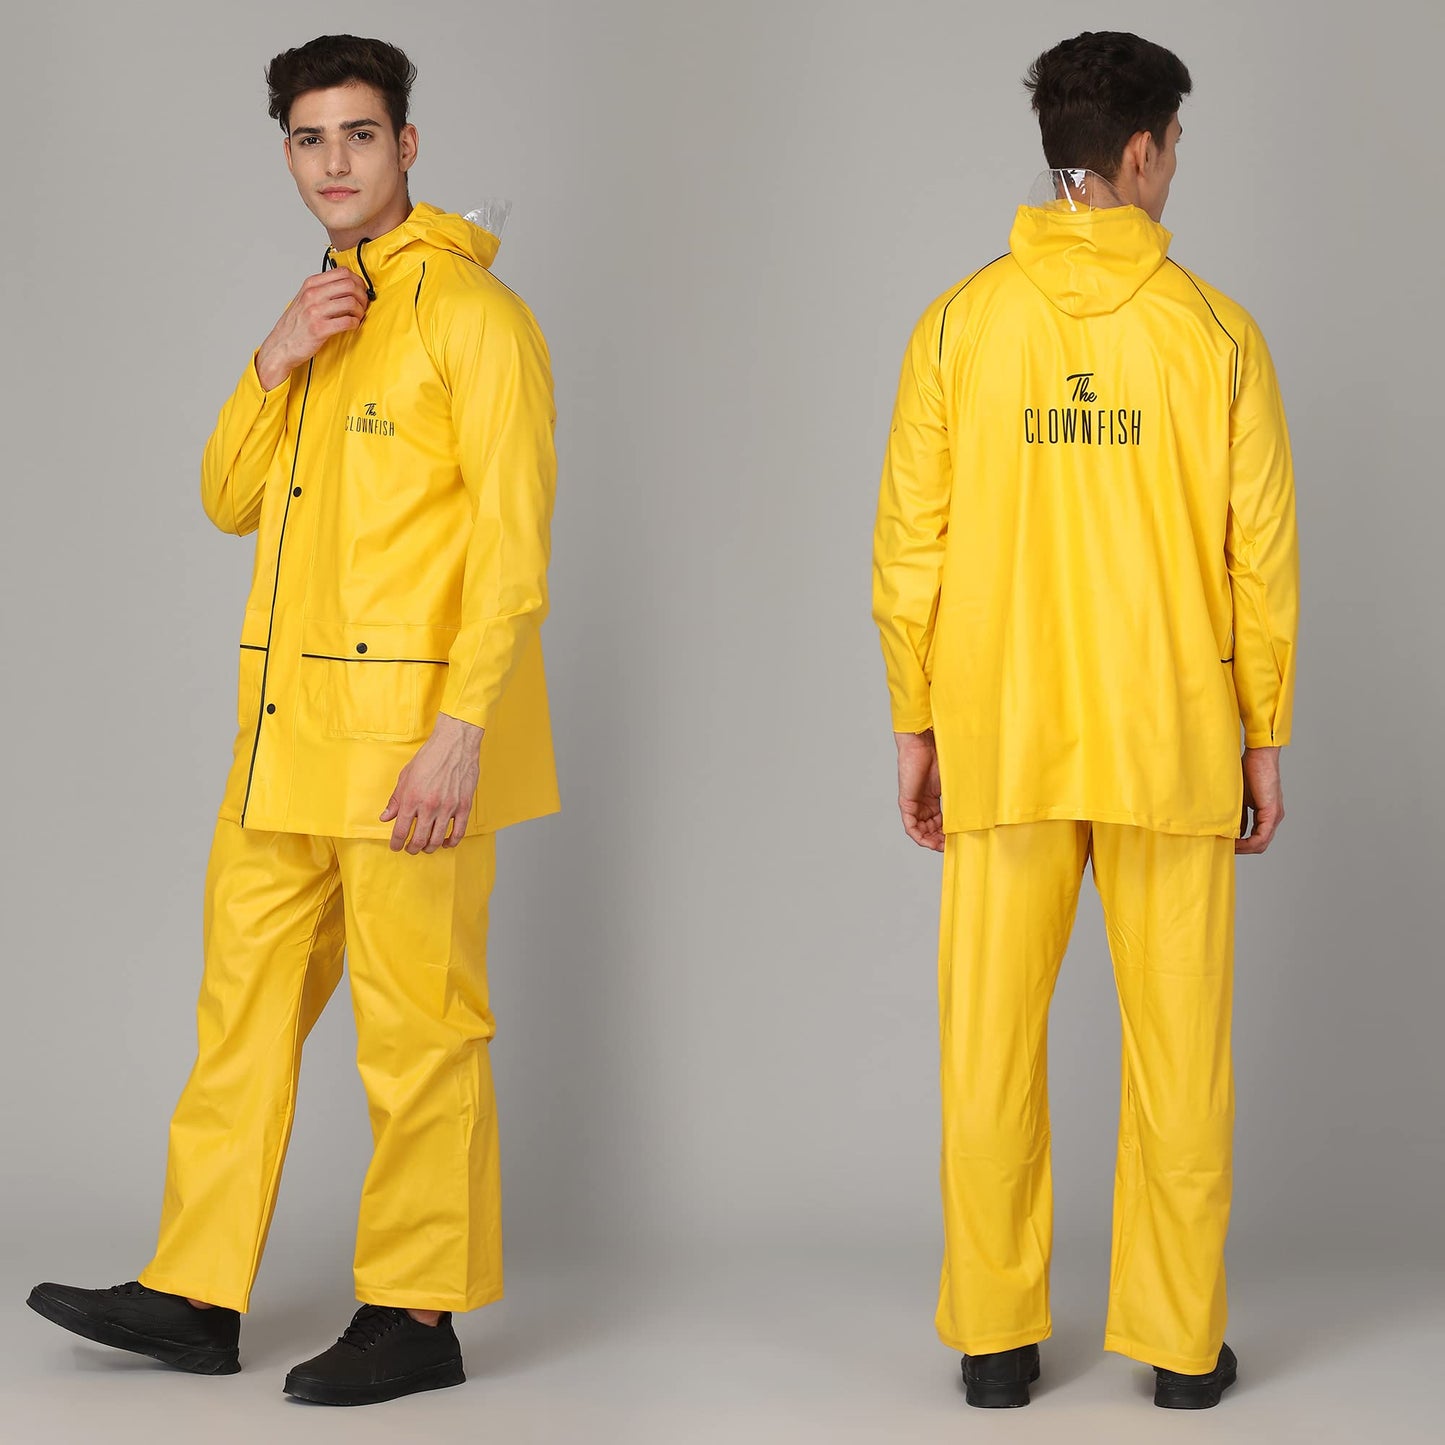 THE CLOWNFISH Oceanic Men's Waterproof PVC Raincoat with Hood and Reflector Logo at Back for Night Travelling. Set of Top and Bottom (Blue, XL)